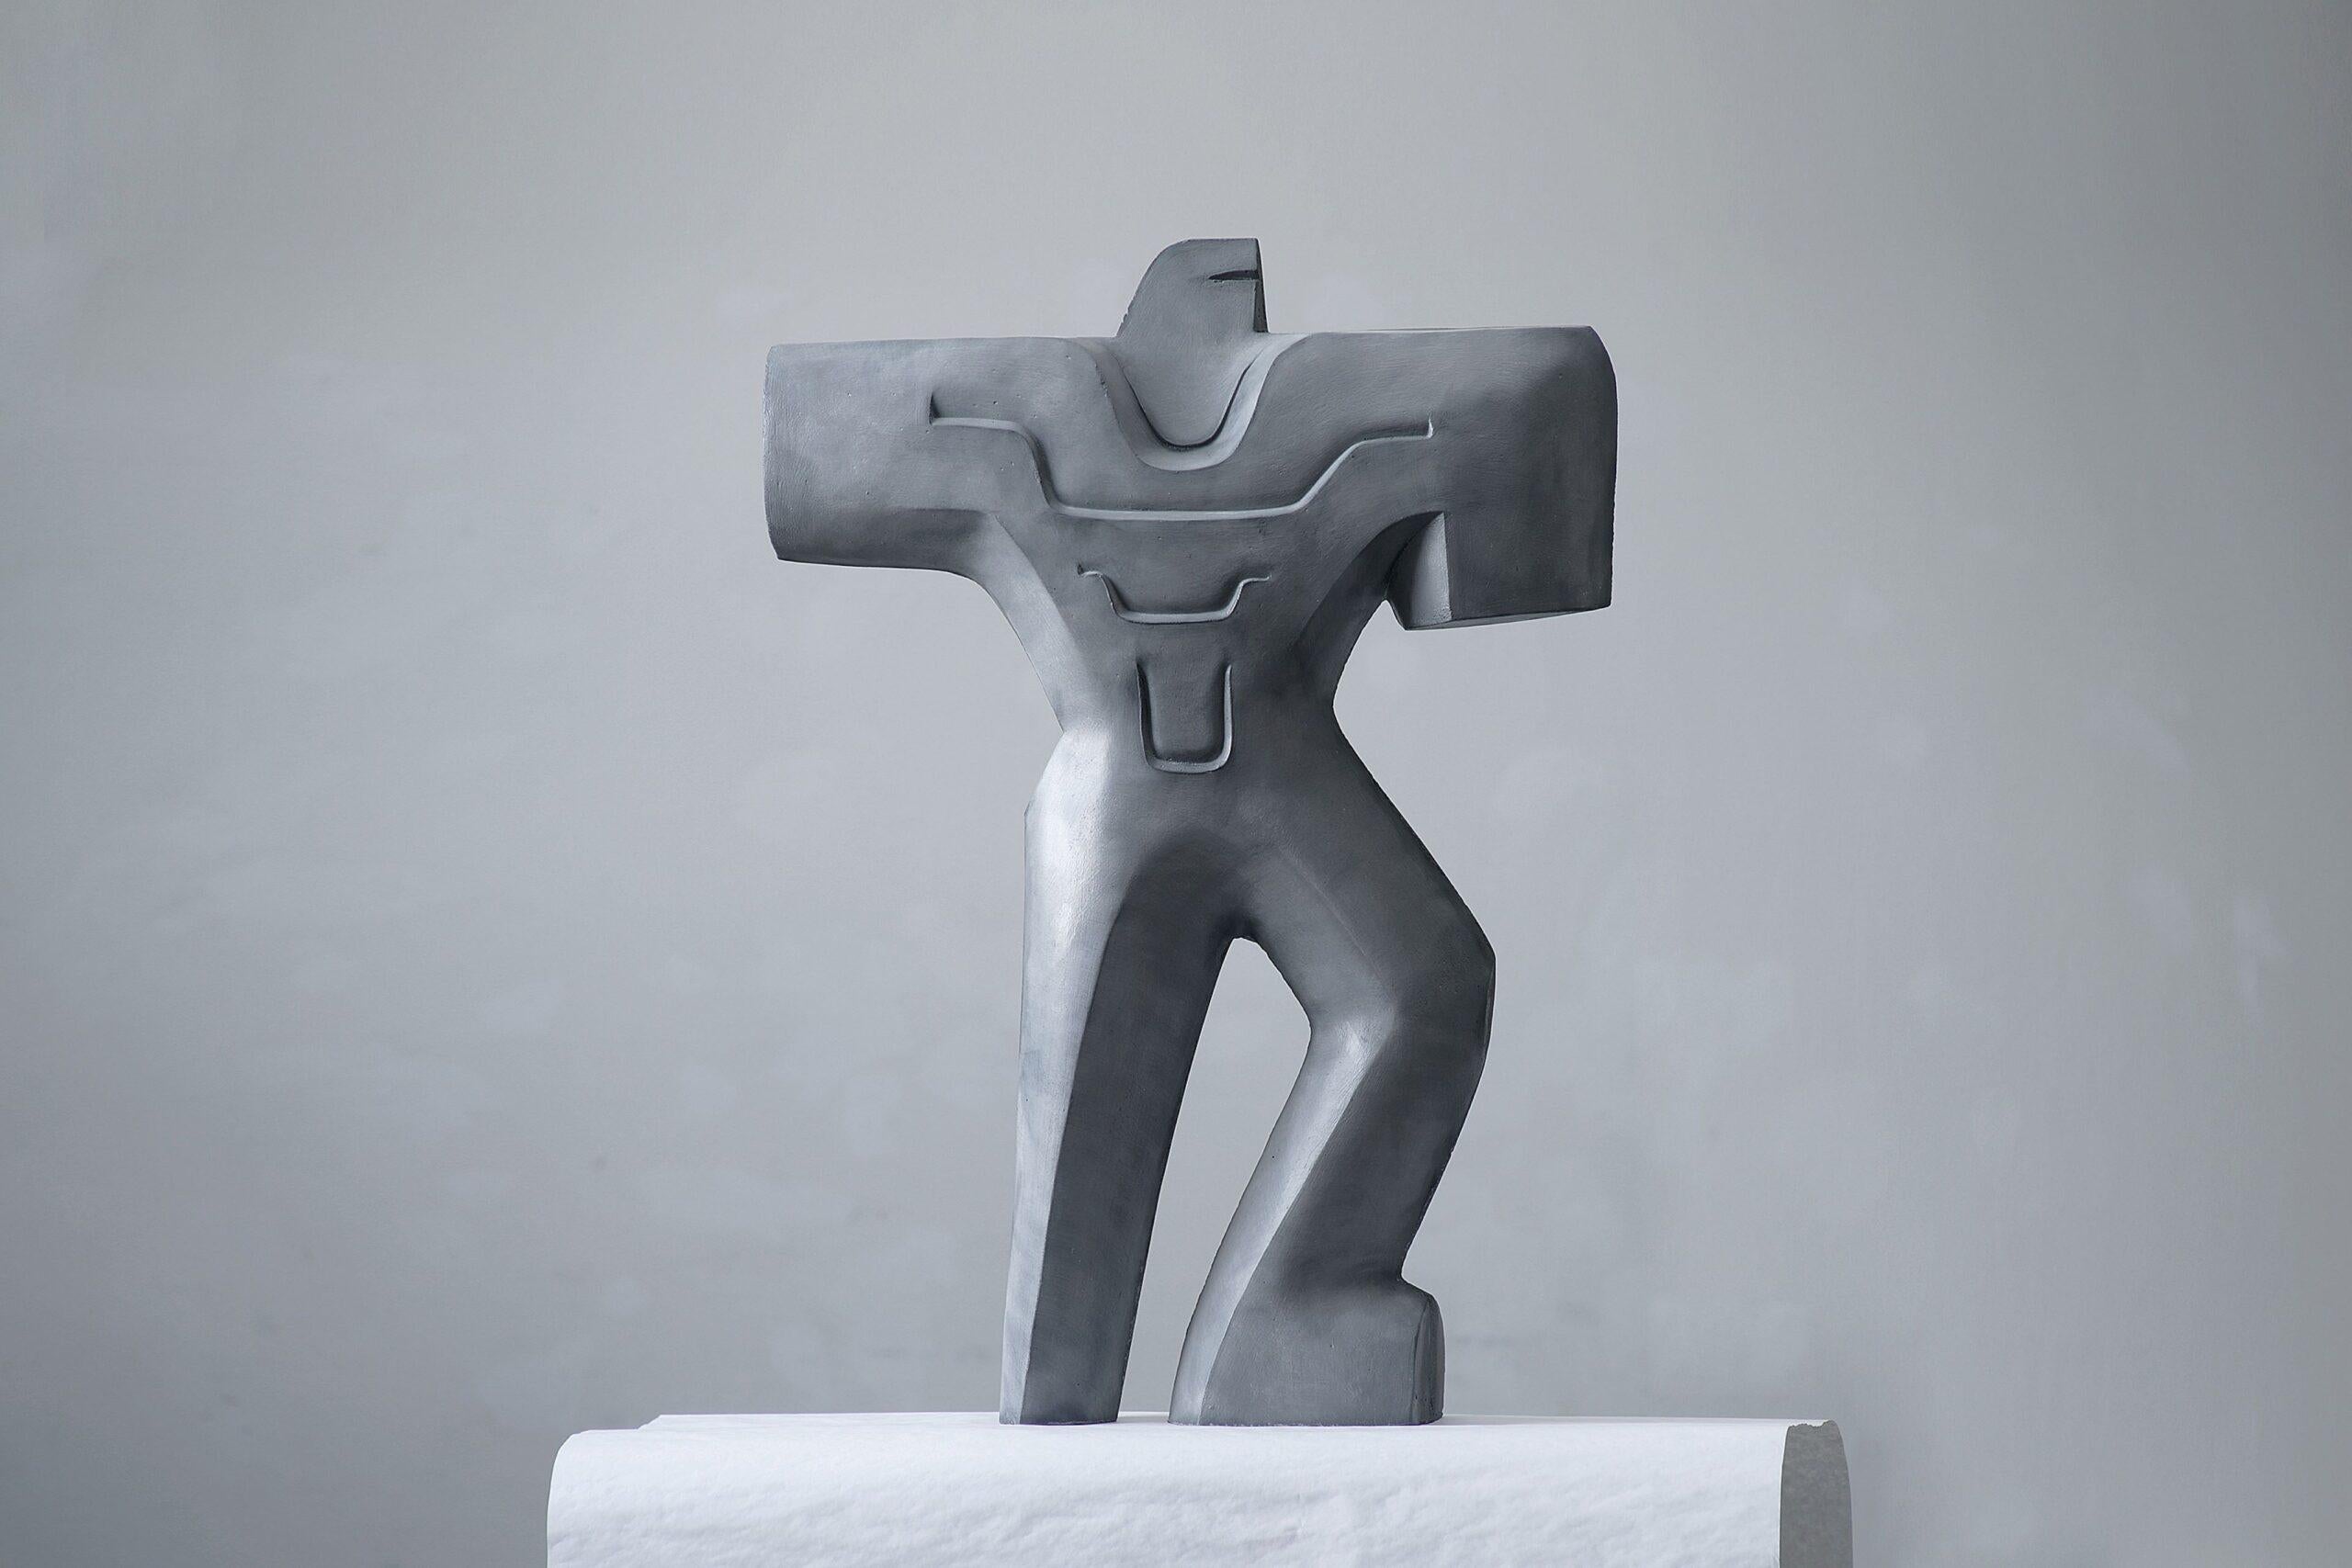 Warrior in Armor is a glass fiber reinforced concrete or coloured artificial stone sculpture by contemporary artist Pavlína Kvita, dimensions are 87 × 63 × 14 cm (34.3 × 24.8 × 5.5 in). The dimensions of a steel plinth are 120 cm (47.2 in). The